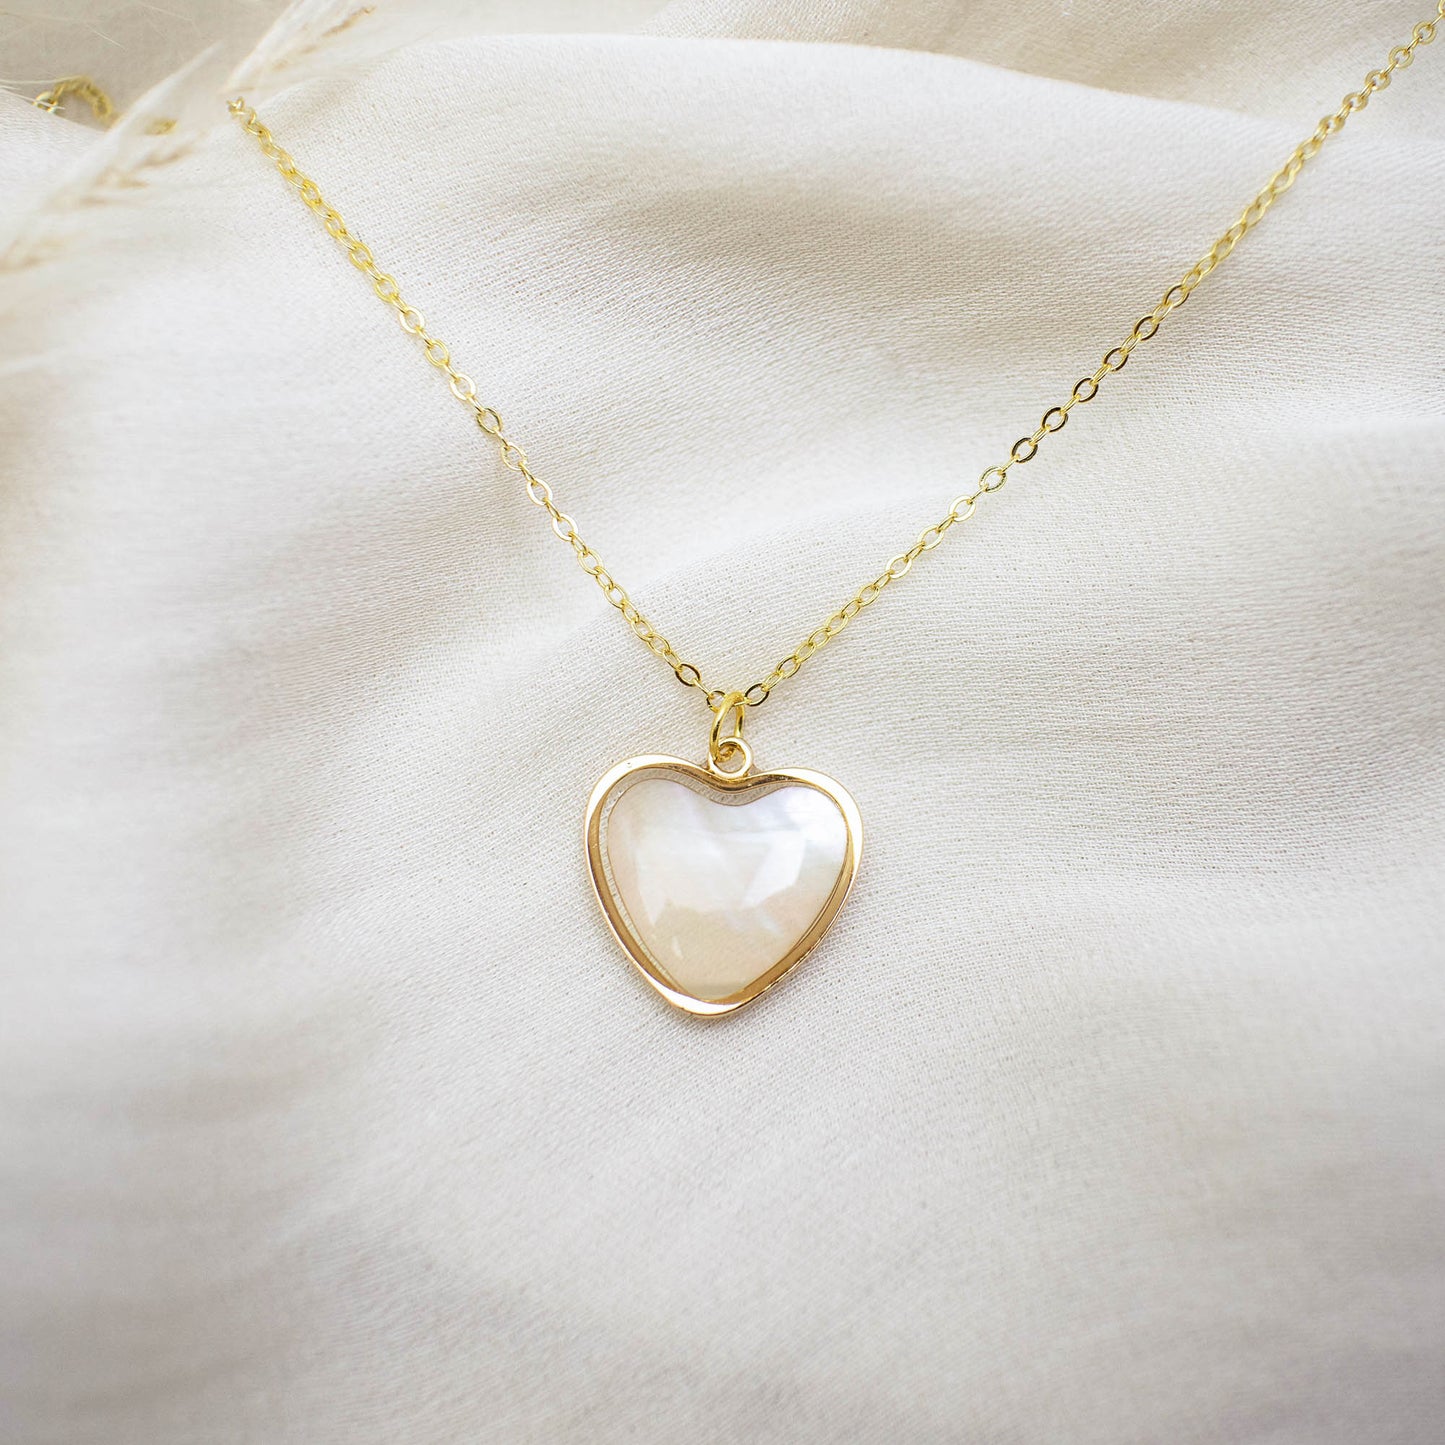 This photo showcases a thin chain necklace with 14K gold plated Sterling Silver, paired with a heart-shaped pendant made of pearl paper.